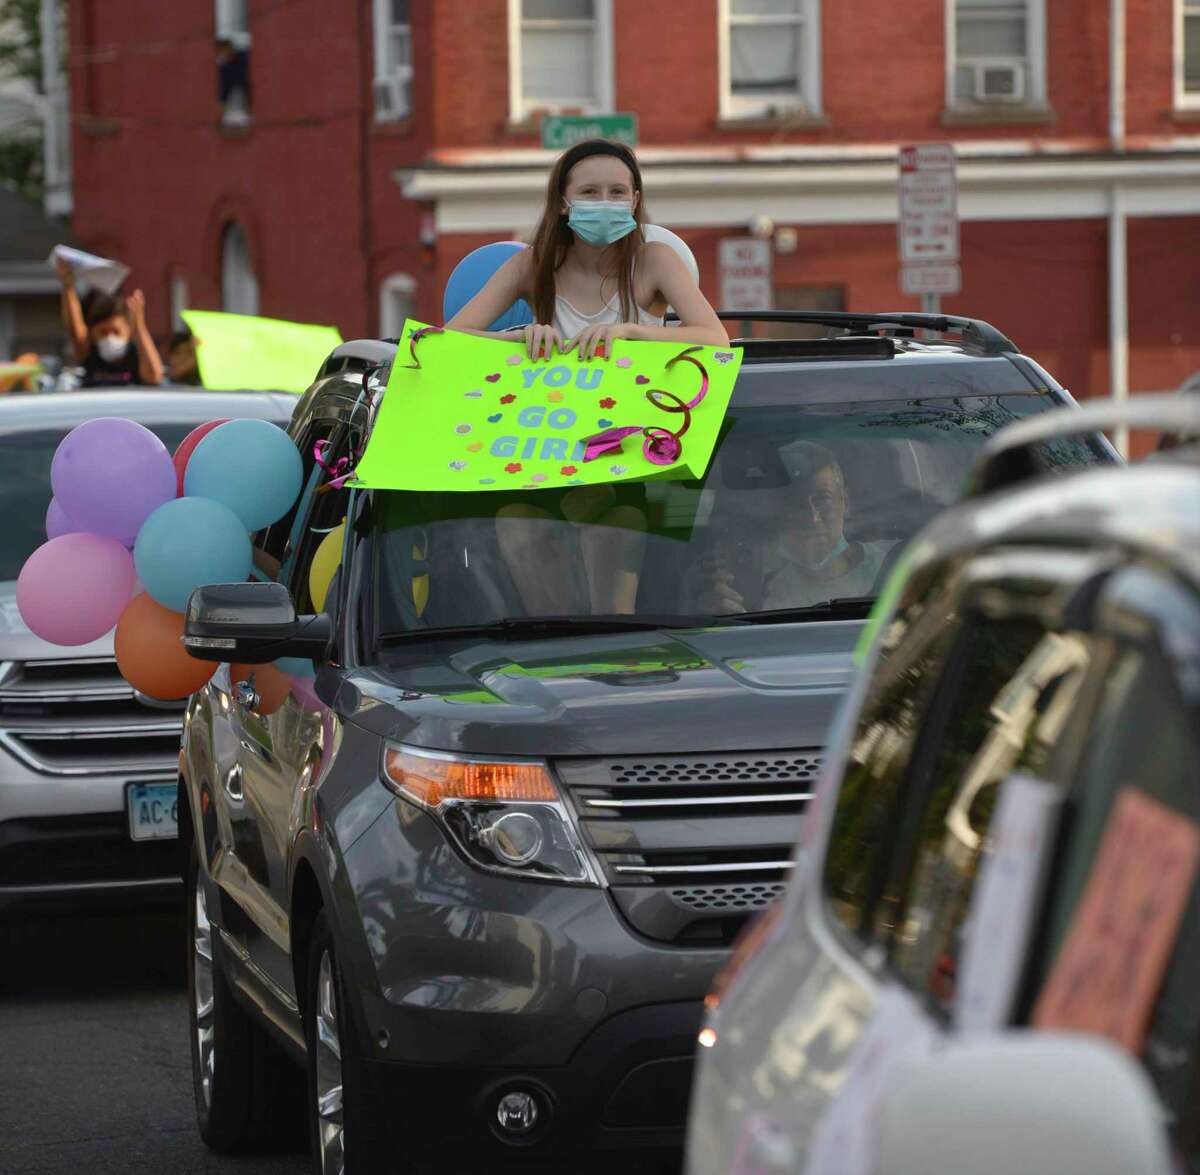 Stamford resident Amanda Campos, 12, was surprised with a celebratory parade past her house after completing 3 years of chemotherapy. She is now cancer free. Local nonprofit Circle of Care provided support to Amanda and her family. Wednesday, August 26, 2020, in Stamford, Conn.